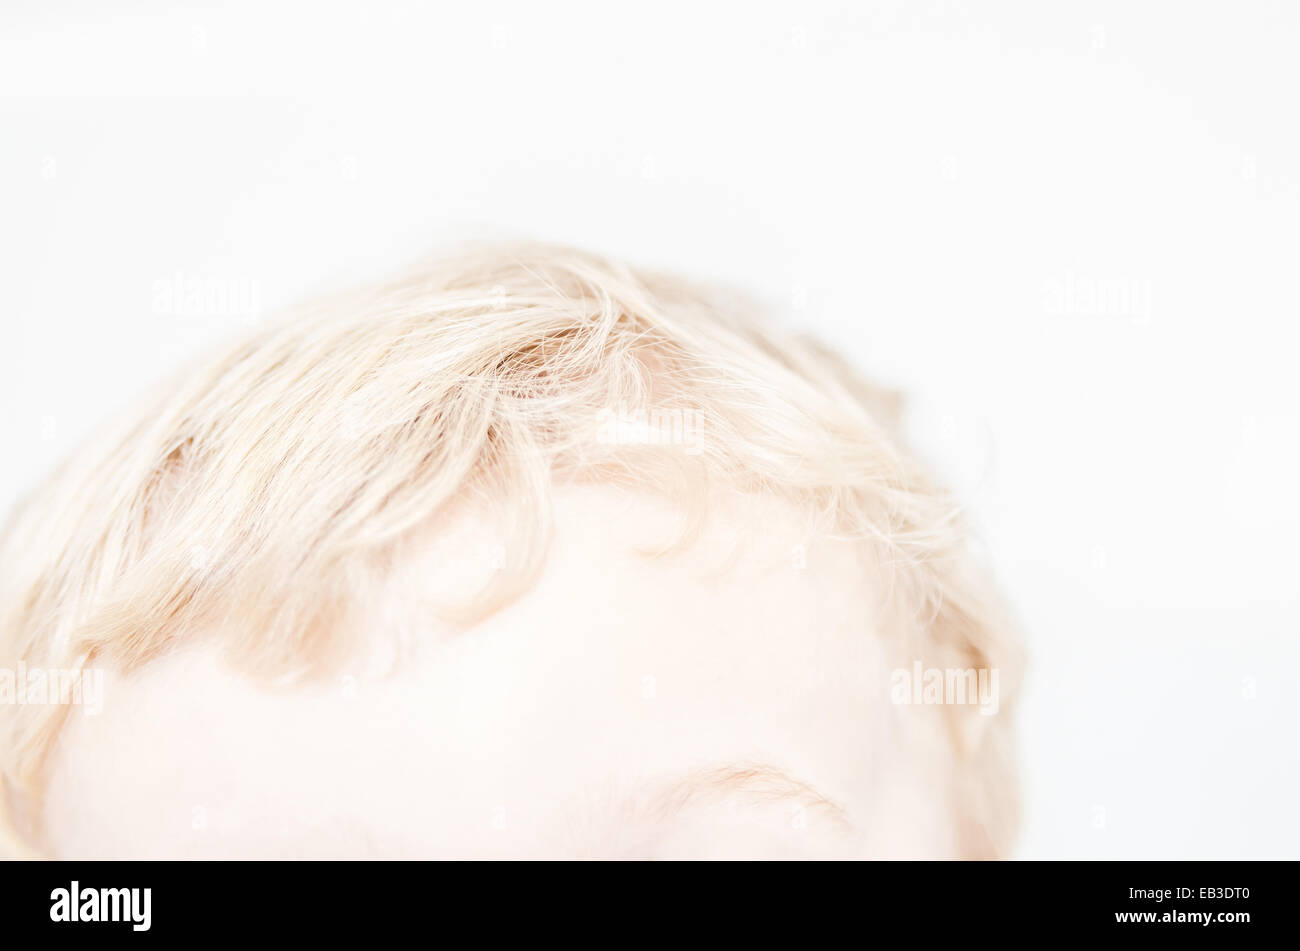 Close-up portrait of a boy's forehead Stock Photo